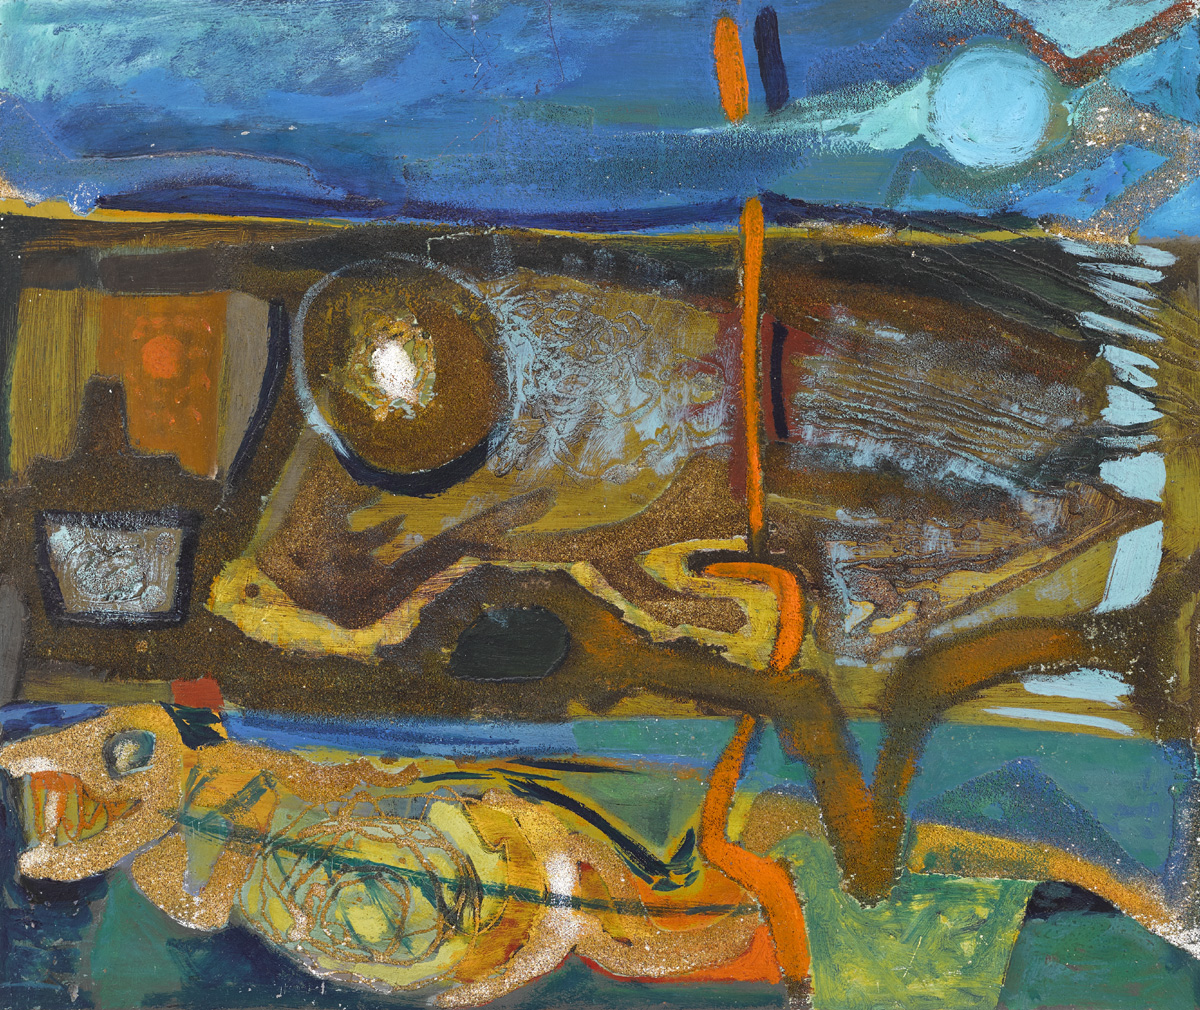 SEA BEAST by Gerard Dillon (1916-1971) at Whyte's Auctions